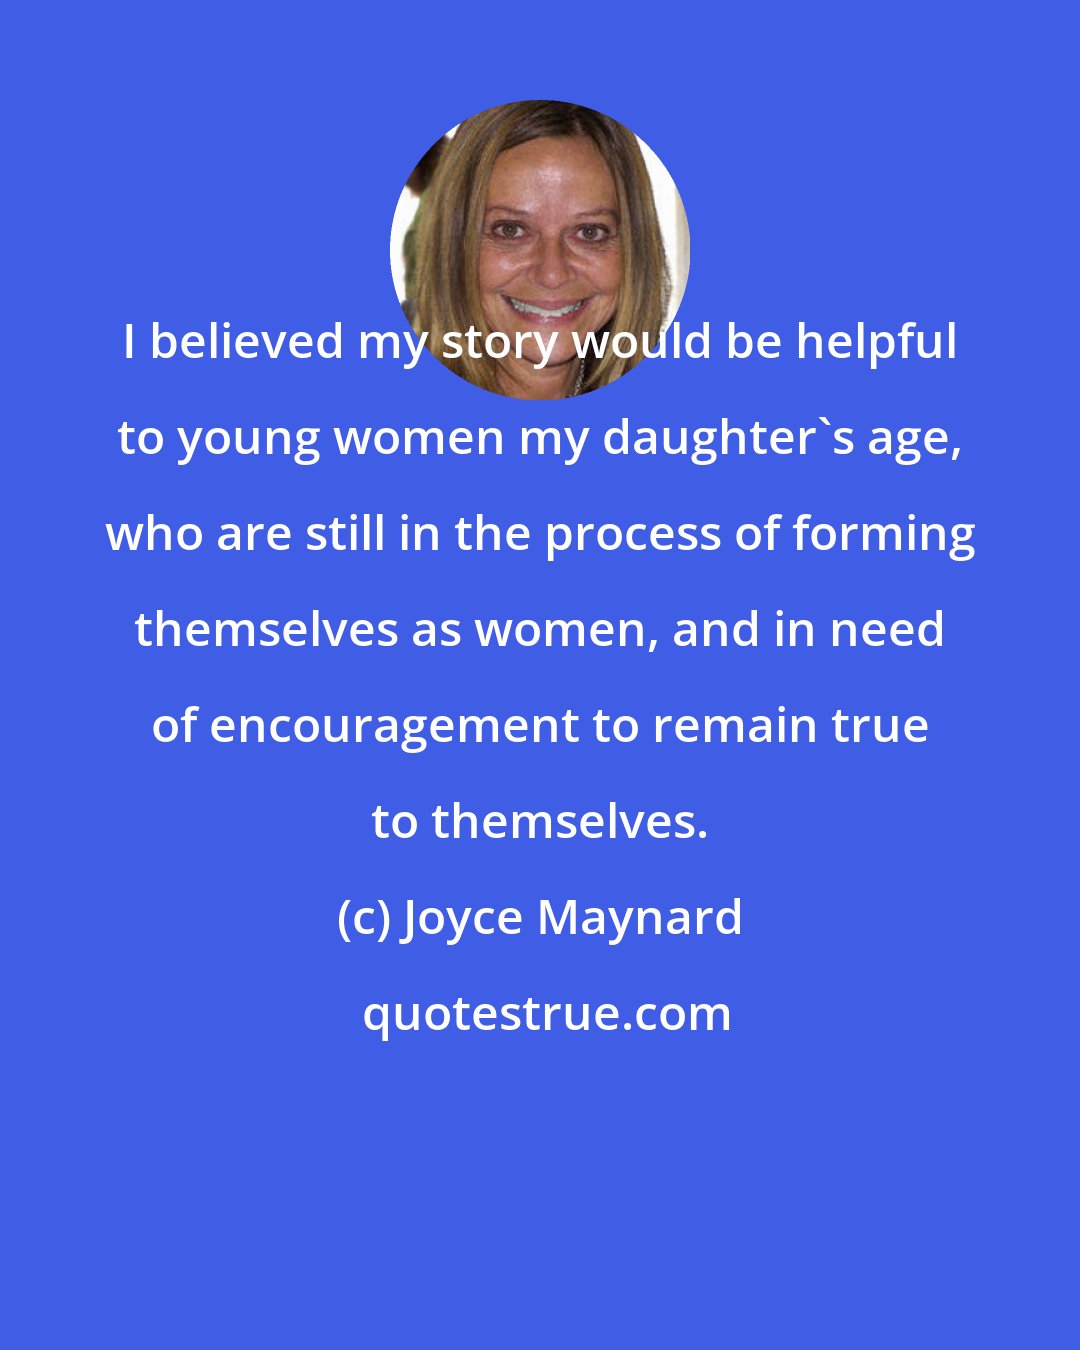 Joyce Maynard: I believed my story would be helpful to young women my daughter's age, who are still in the process of forming themselves as women, and in need of encouragement to remain true to themselves.